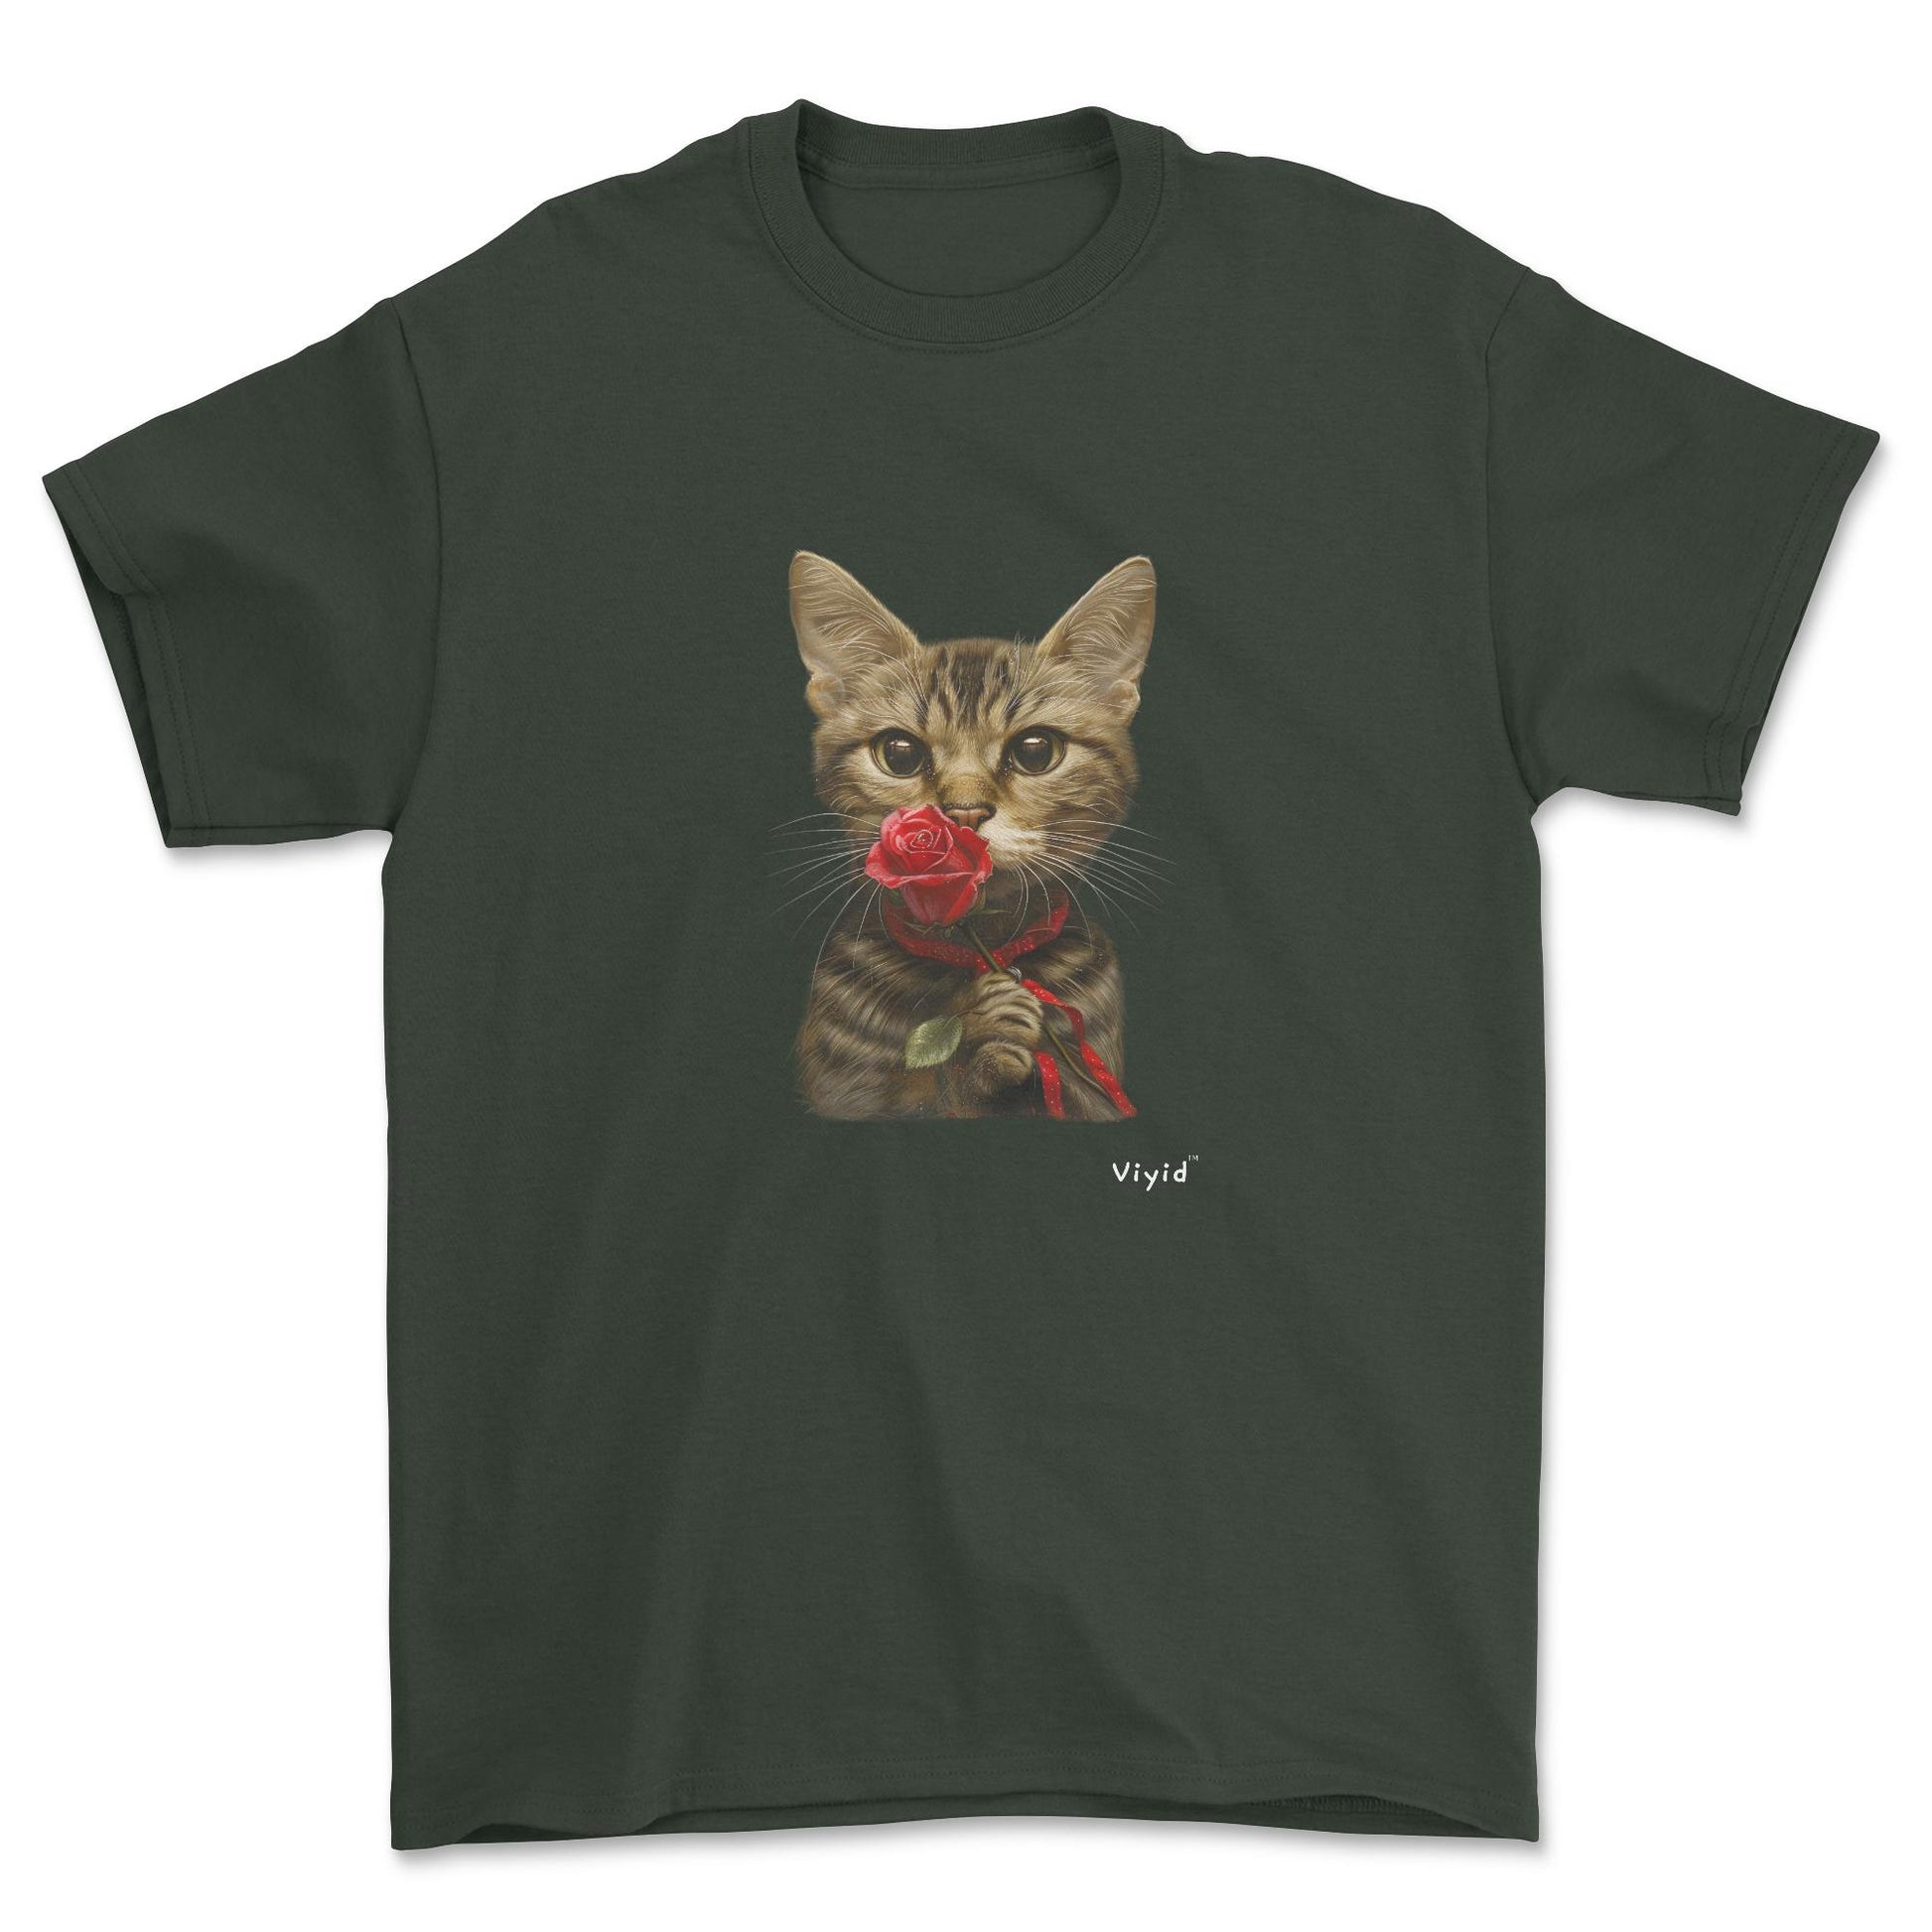 sniffing rose domestic shorthair cat adult t-shirt forest green